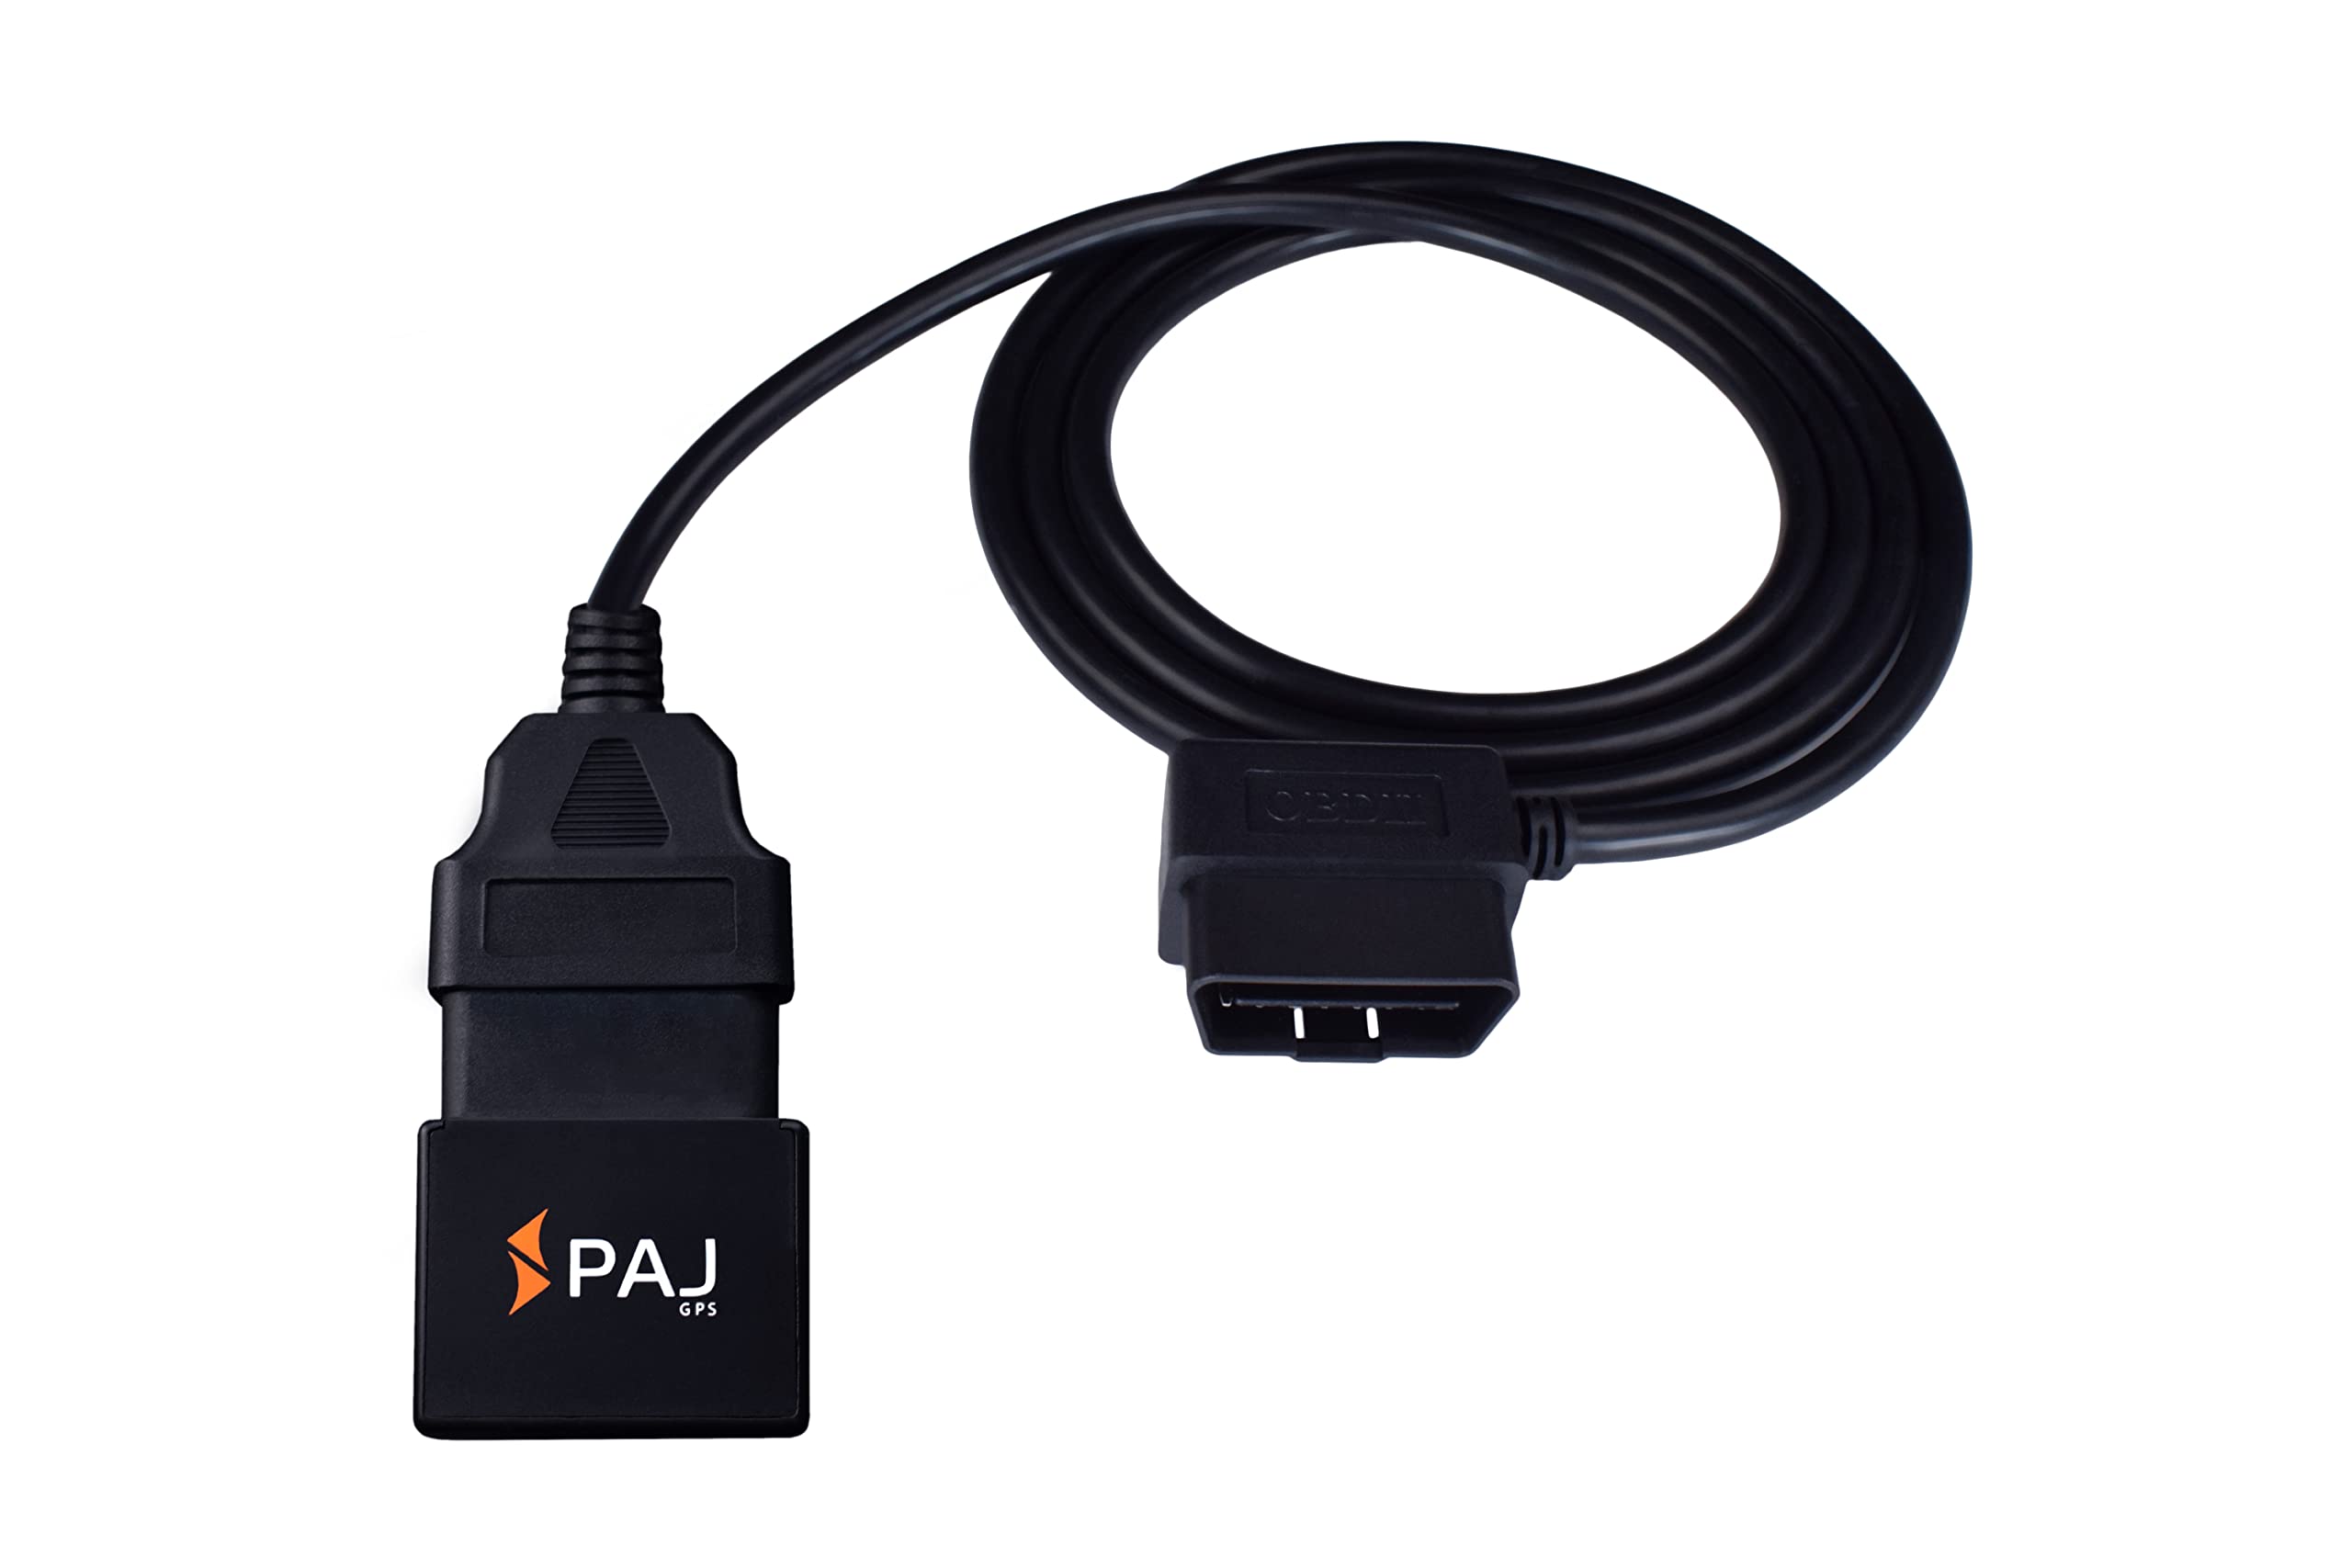 PAJ OBD GPS Tracker Bundle with Extension Cable - 37.4 inch Wire Excellent Fit in Vehicles